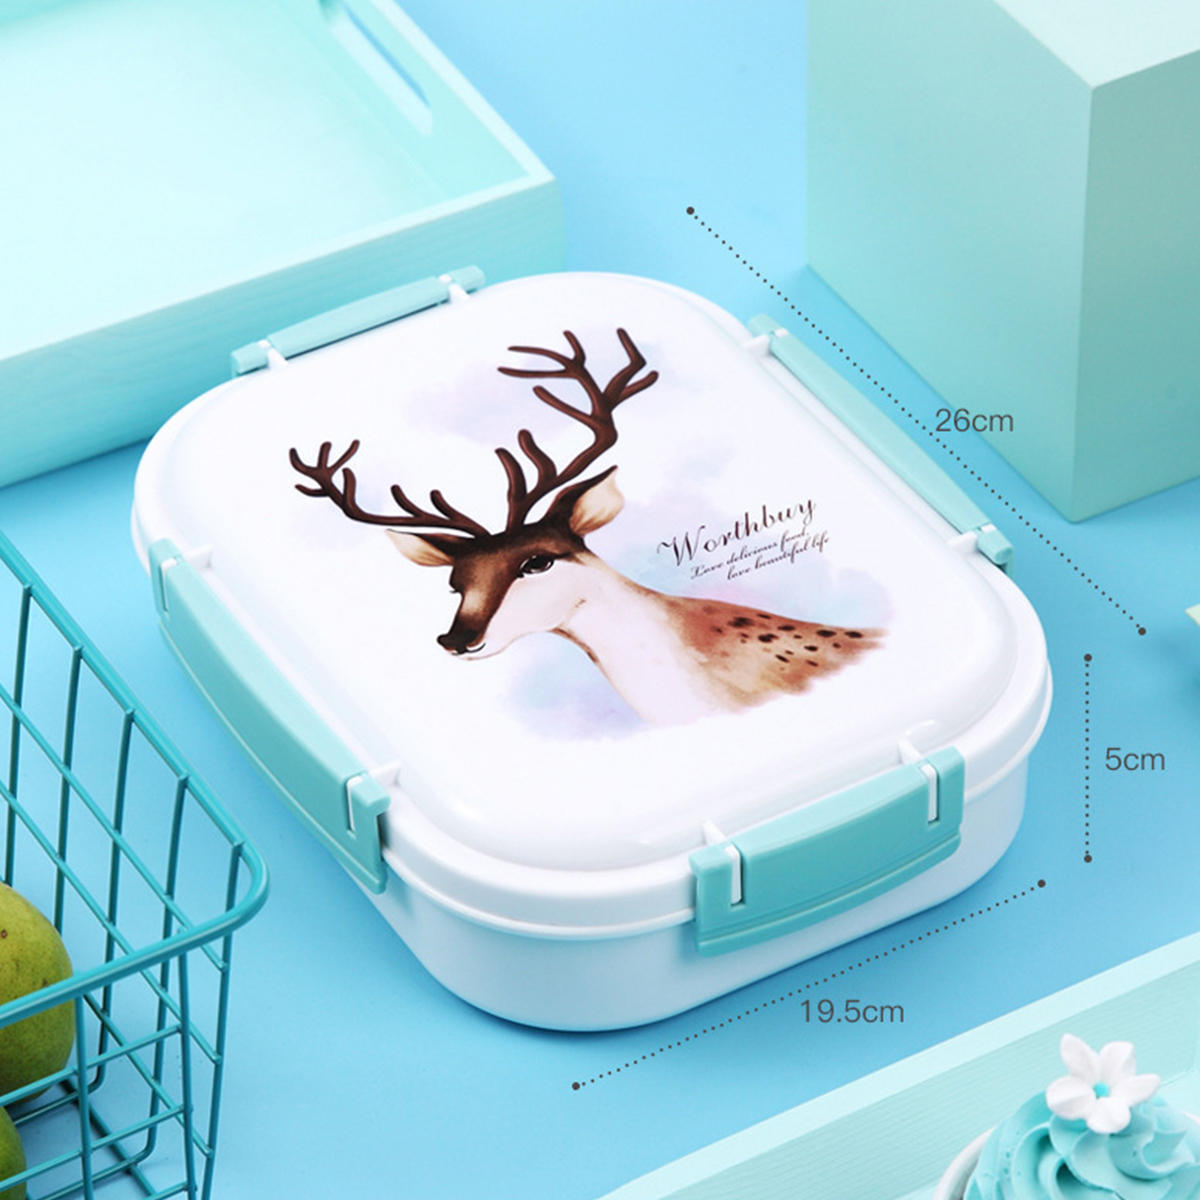 Outdoor Picnic Bento Box Stainless Steel Thermal Food Container Lunch Box 3/4 Grid Japanese Color Pattern